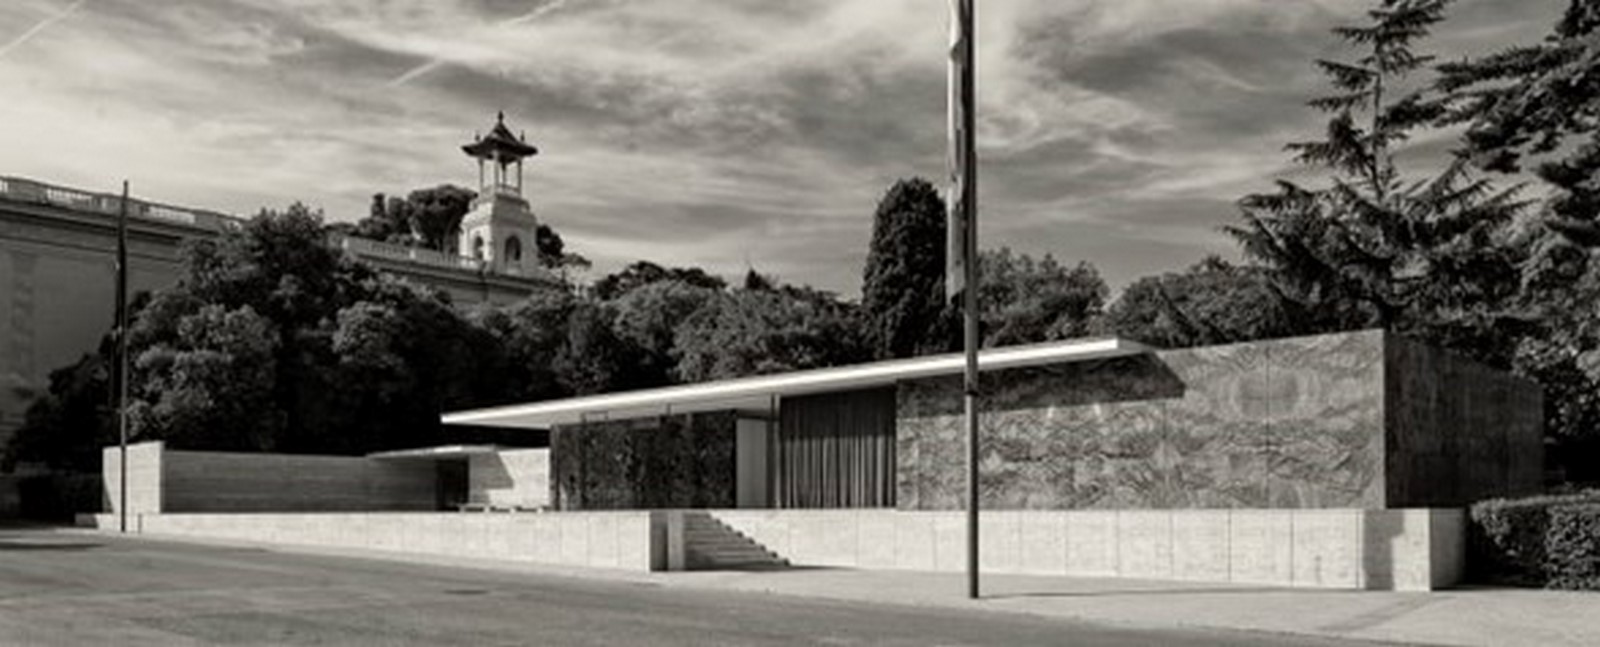 Masterpiece that Changed the History of Architecture- The Barcelona Pavilion by Ludwig Mies van der Rohe and Lilly Reich - Sheet1